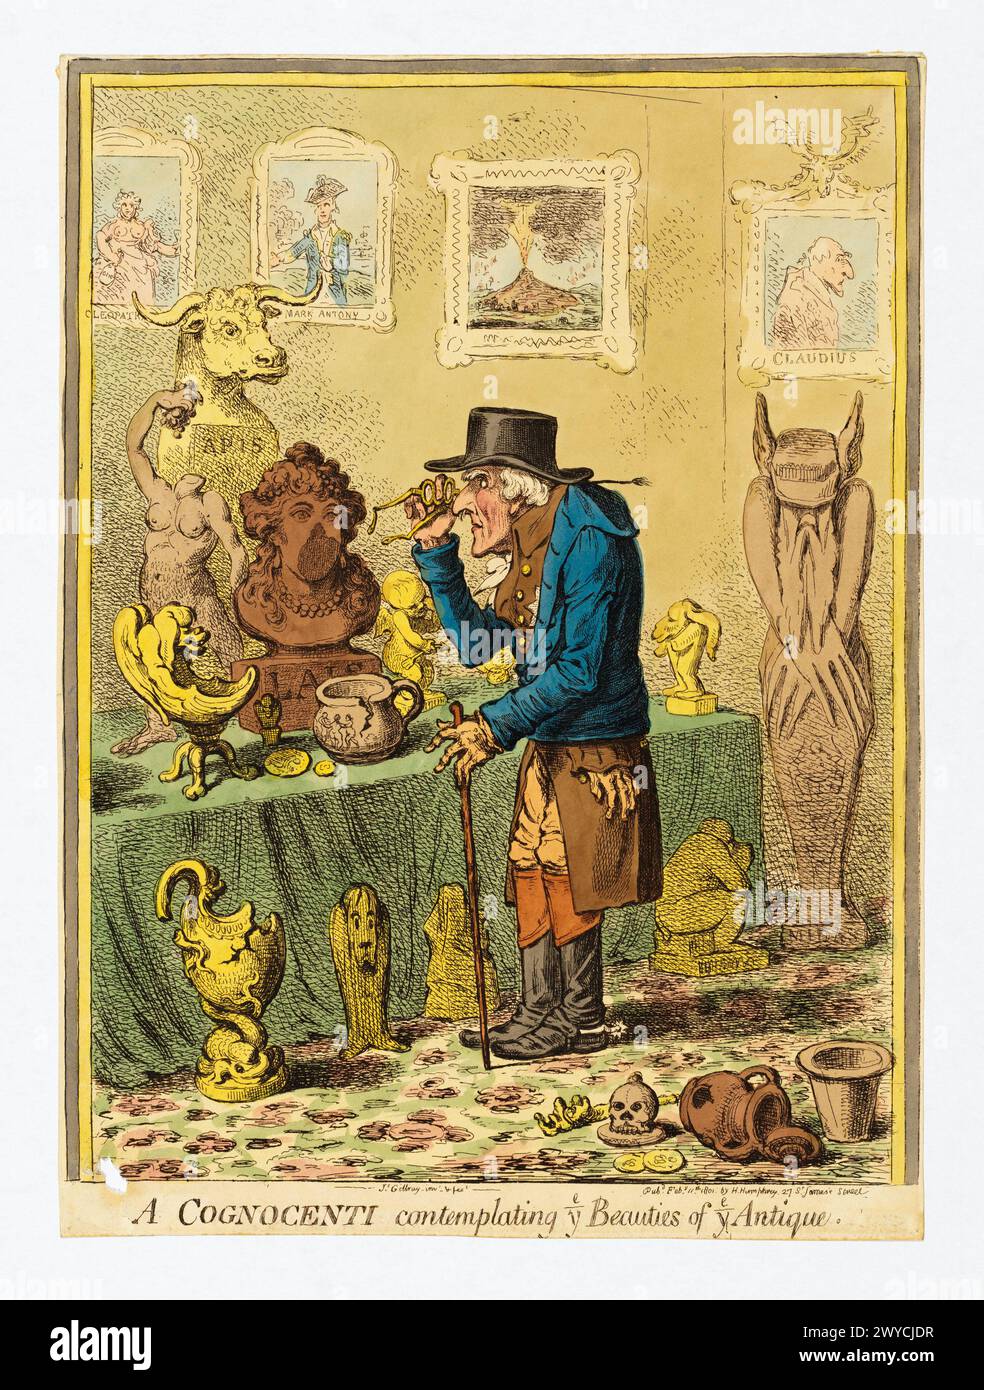 A Cognocenti Contemplating ye Beauties of ye Antique. James Gillray, published by Hannah Humphrey. 11 February 1801. Hand-colored etching. Stock Photo